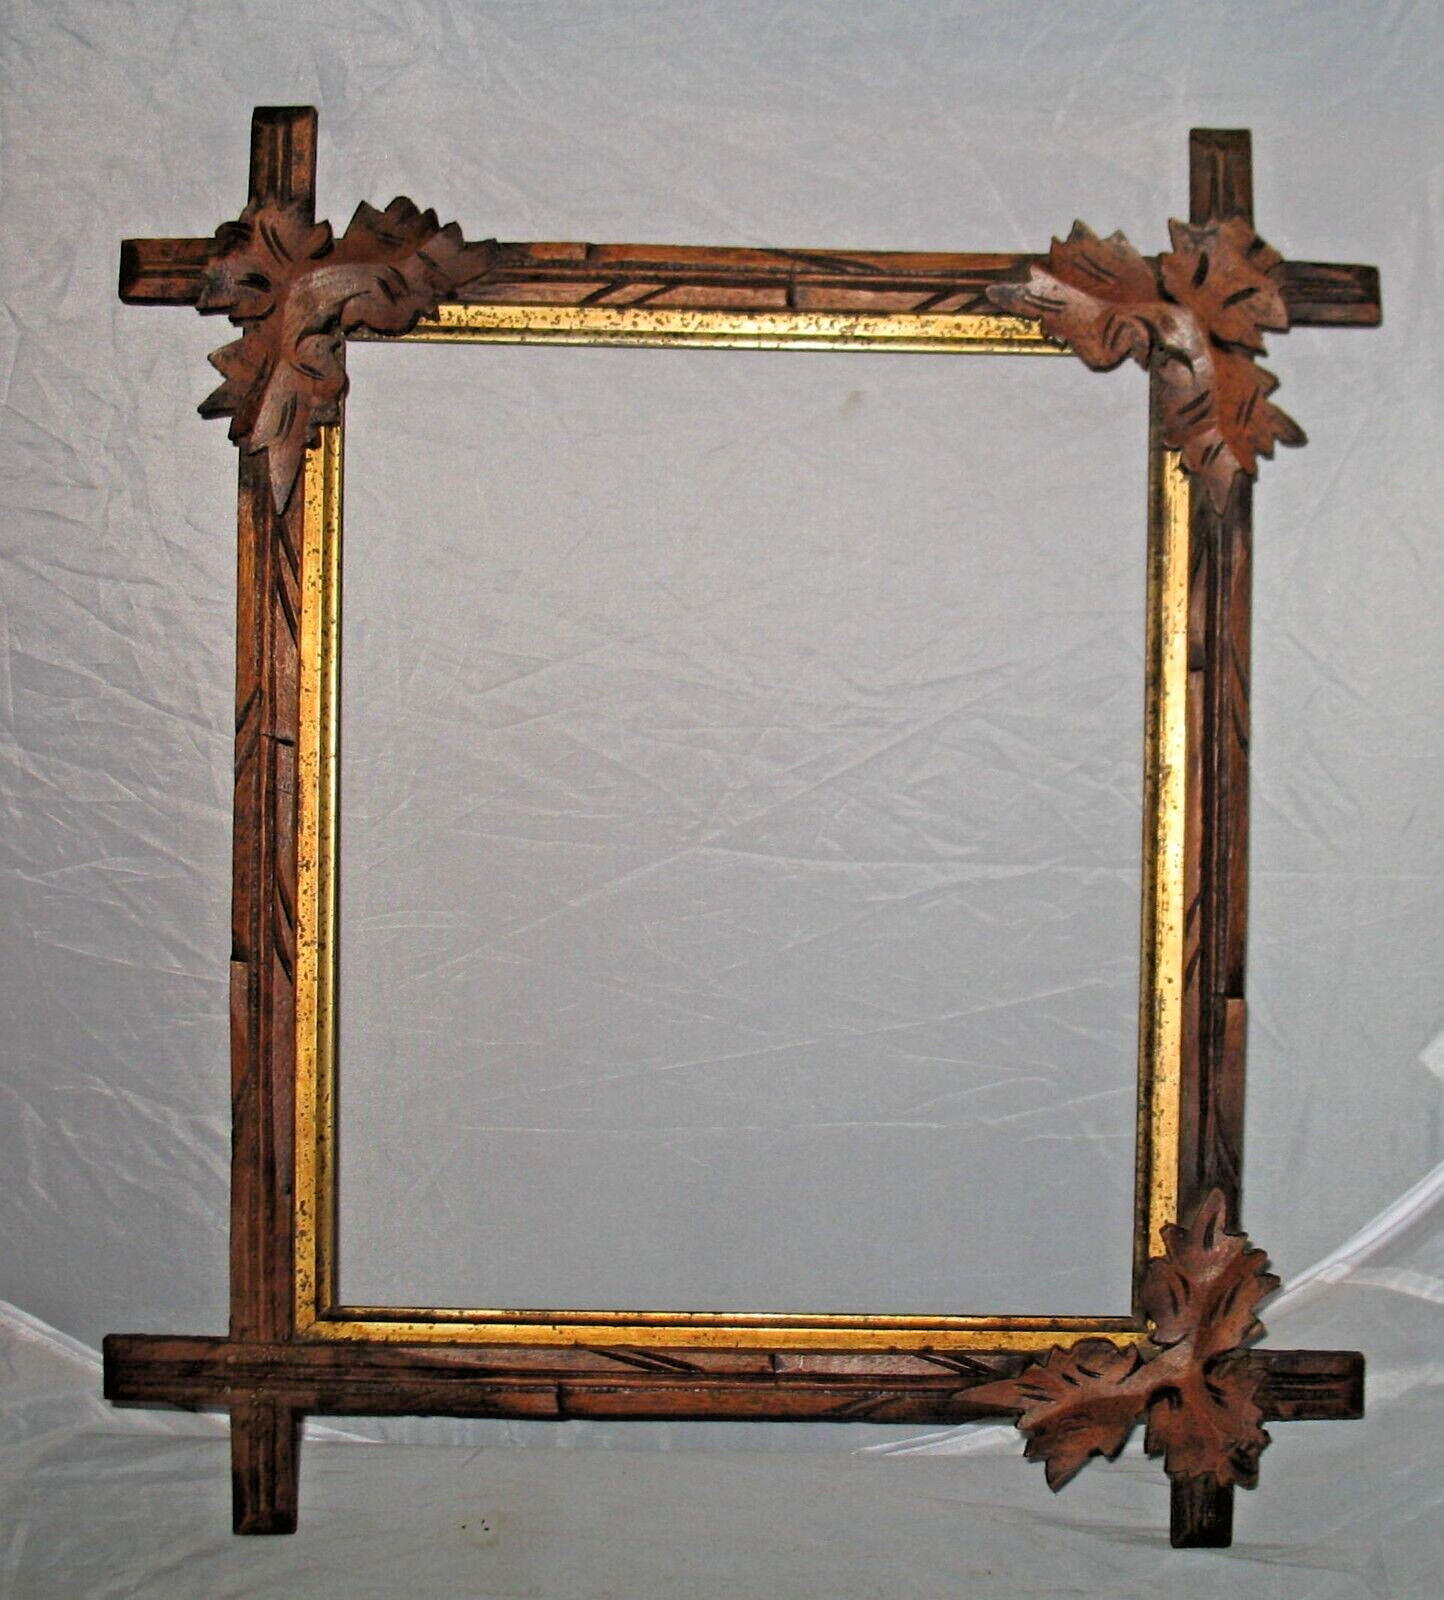 ADIRONDACK BLACK FOREST STYLE CARVED PICTURE FRAME GOLD ACCENTS 17 X 15 VINTAGE